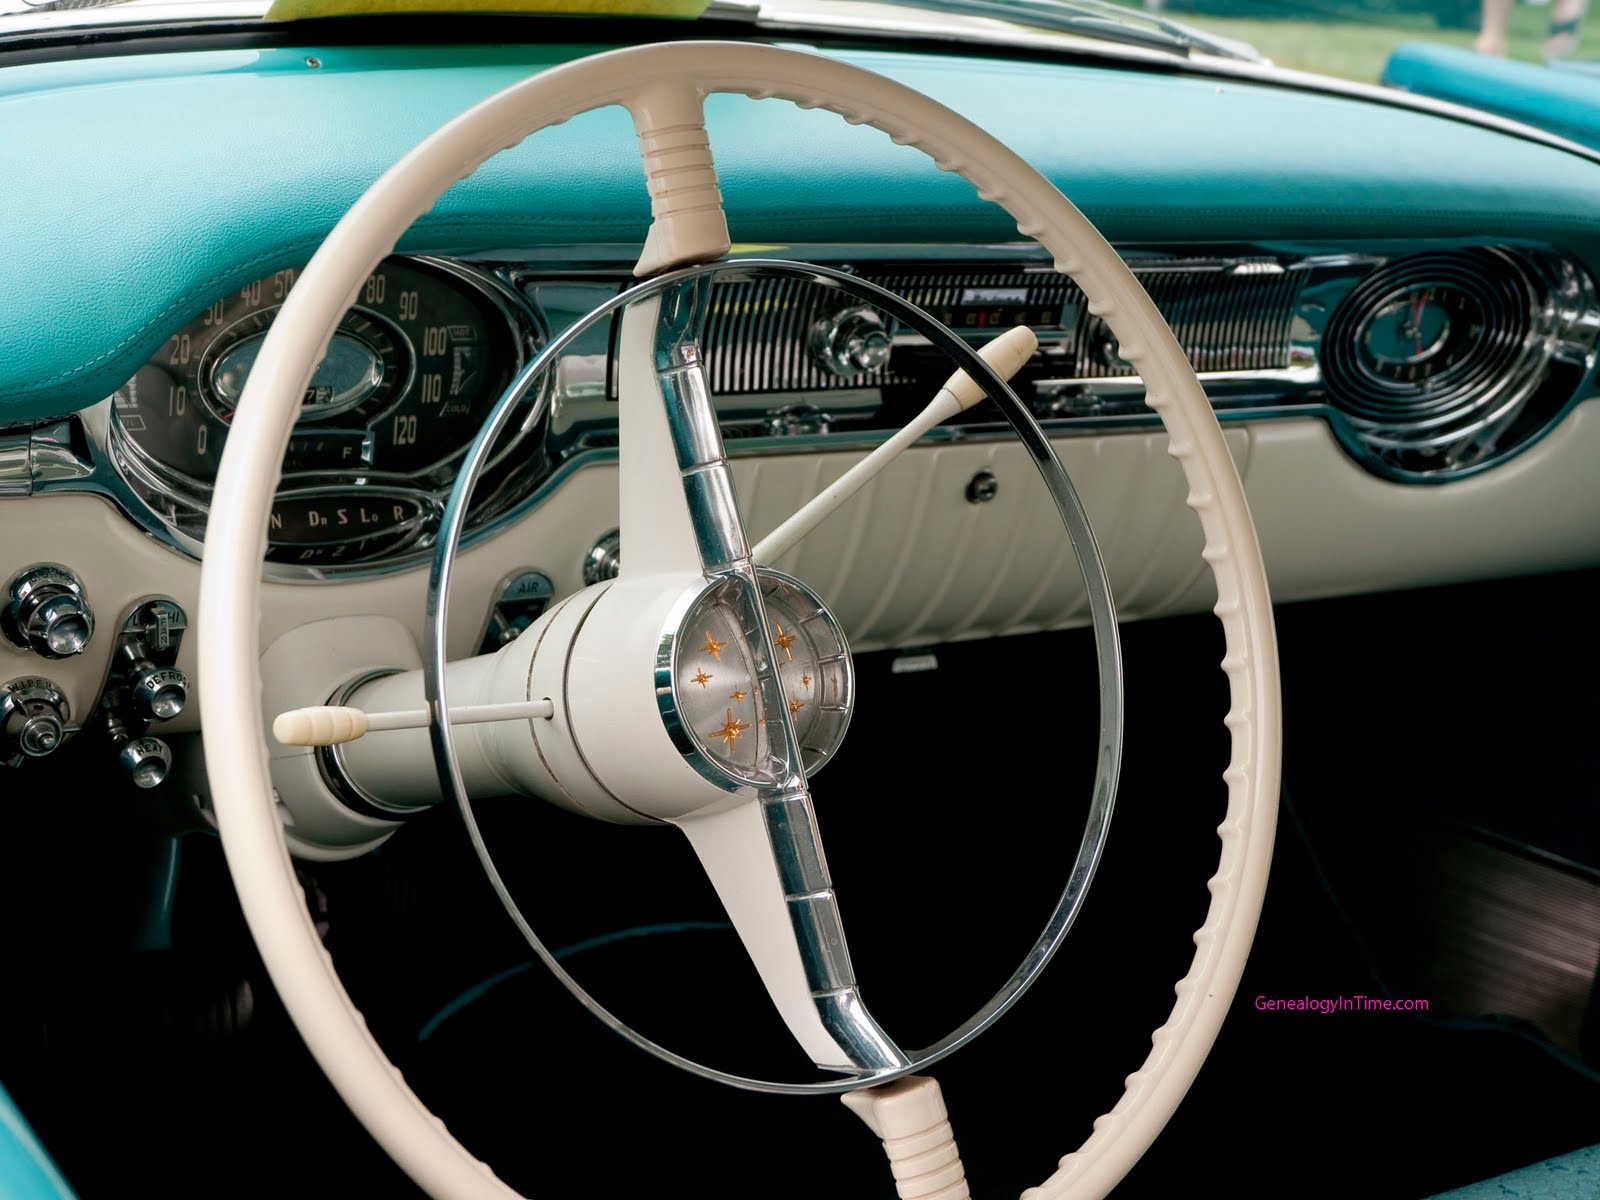 The Beauty of Classic Cars started with the Steering Wheel and Dashboards. 